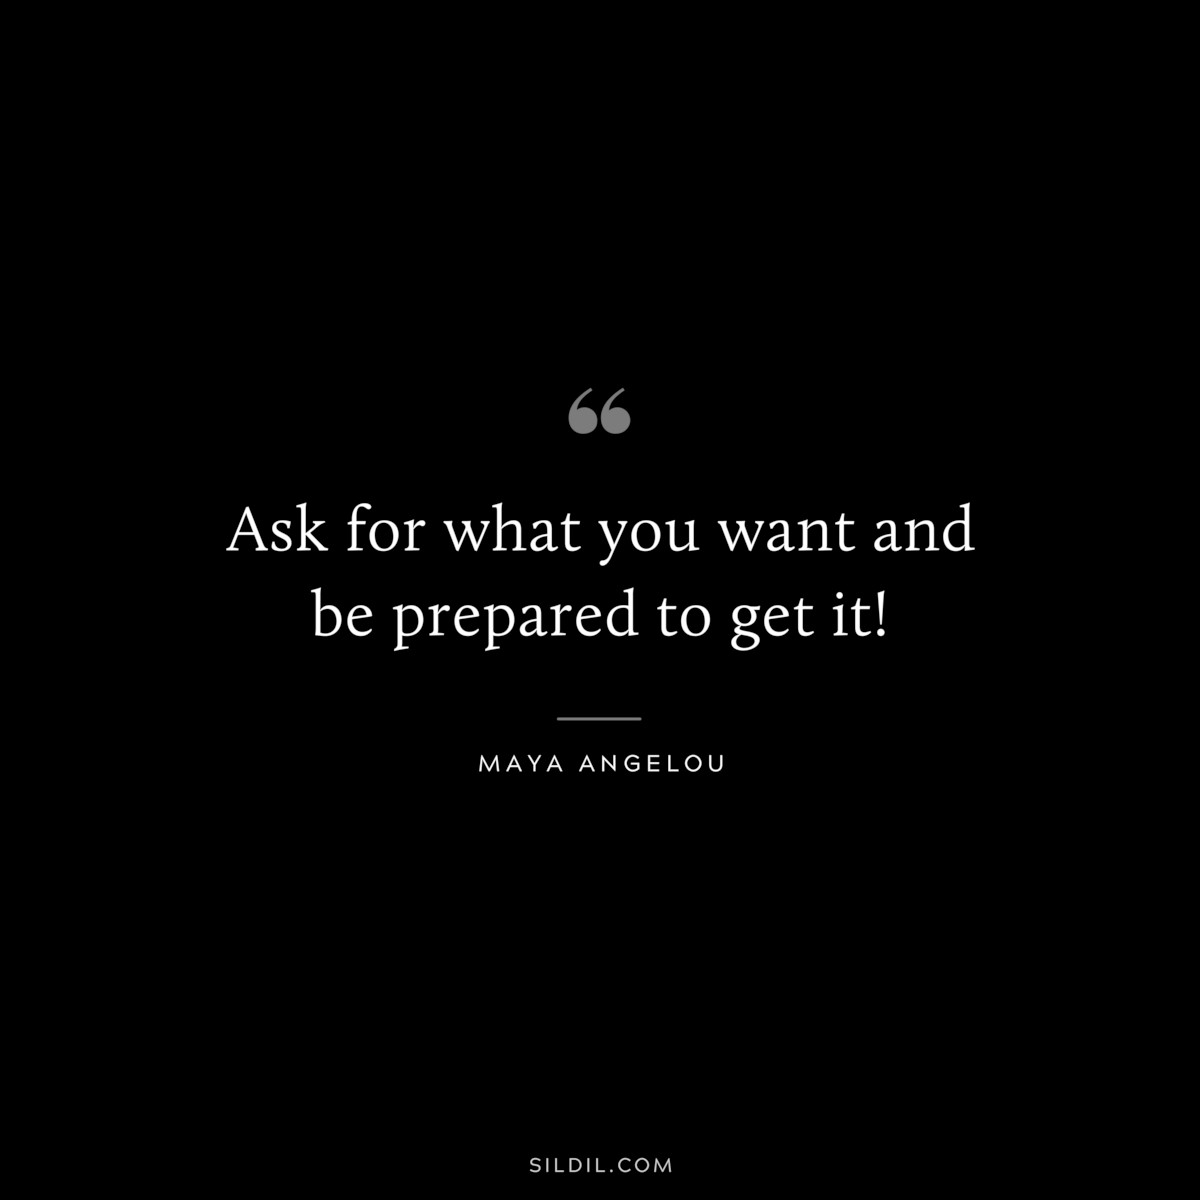 Ask for what you want and be prepared to get it! ― Maya Angelou